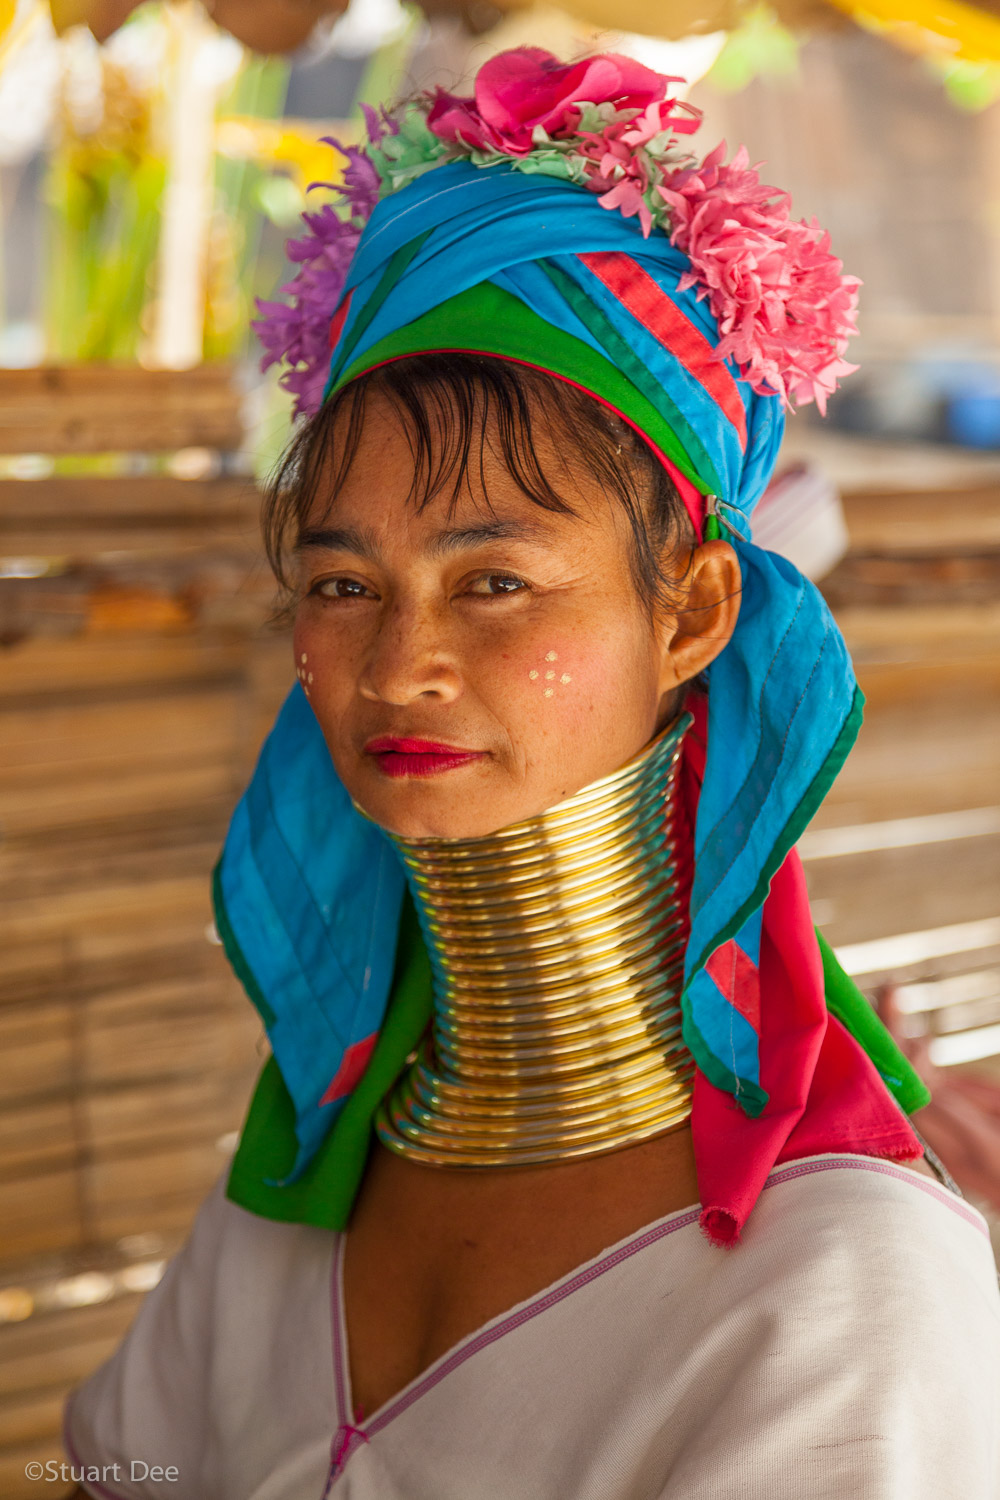  Hill tribe village, near Chiang Mai, Thailand. Padaung long neck woman with brass rings. The Padaung are a subset of the Karen hill tribe people. 